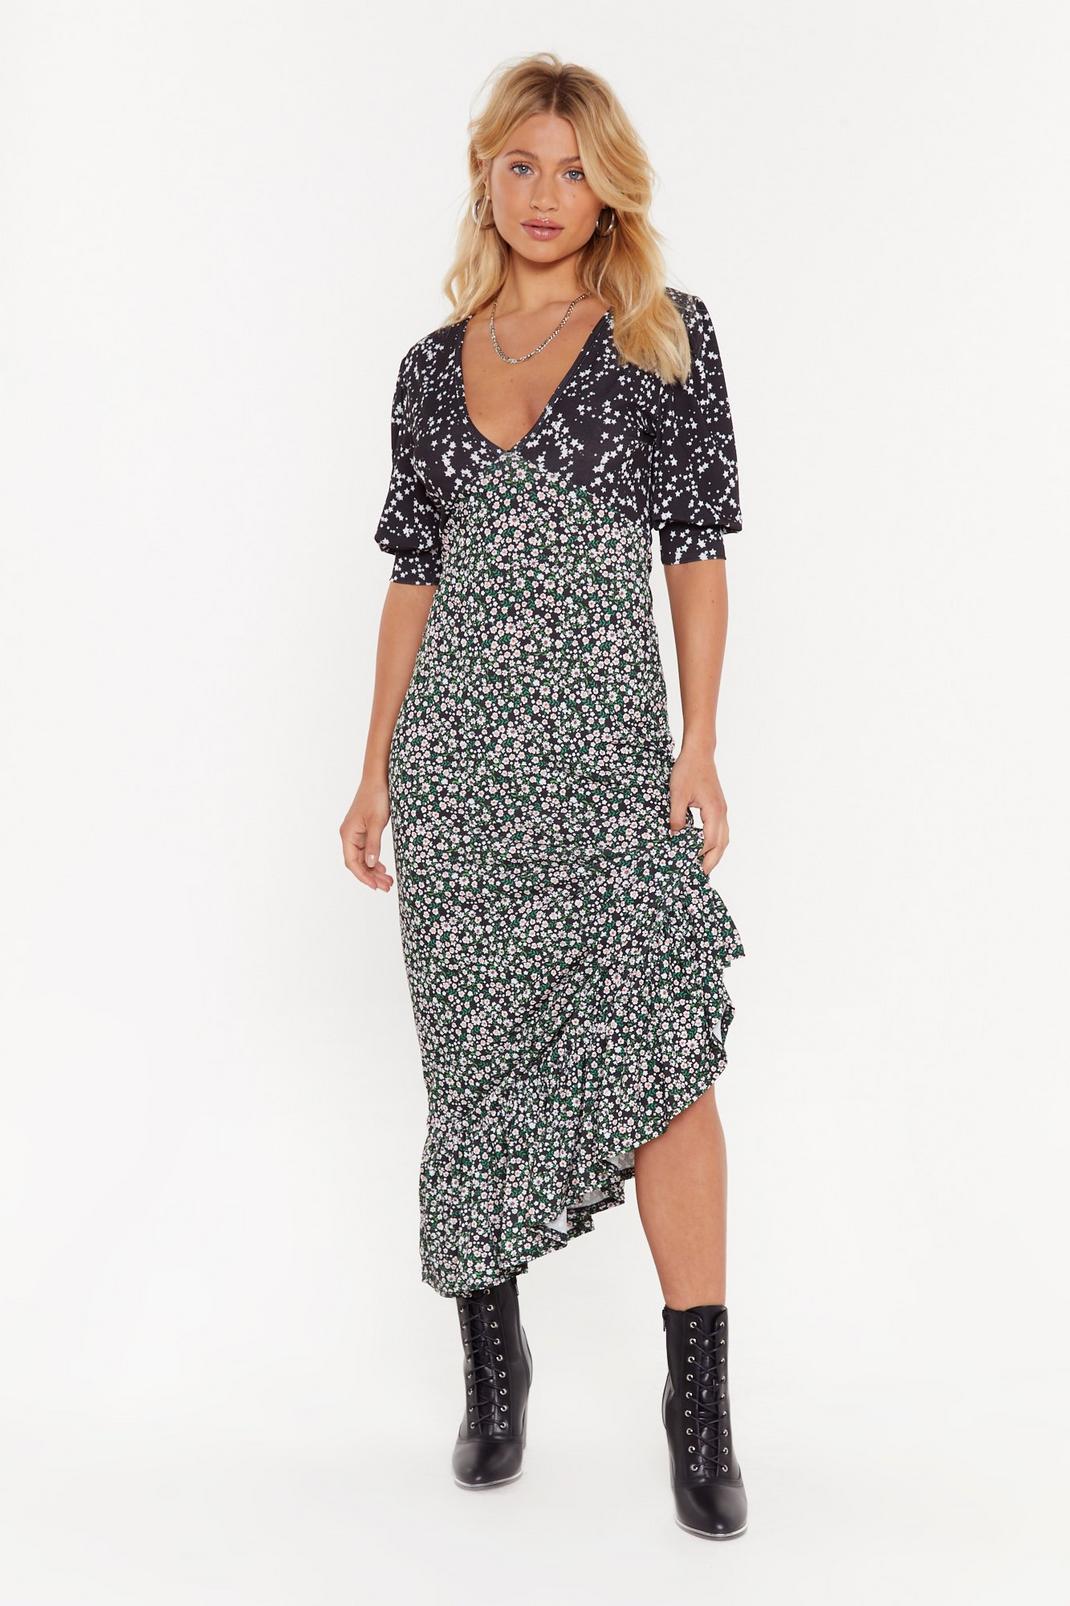 You'll Thank V Later Star Floral Maxi Dress image number 1